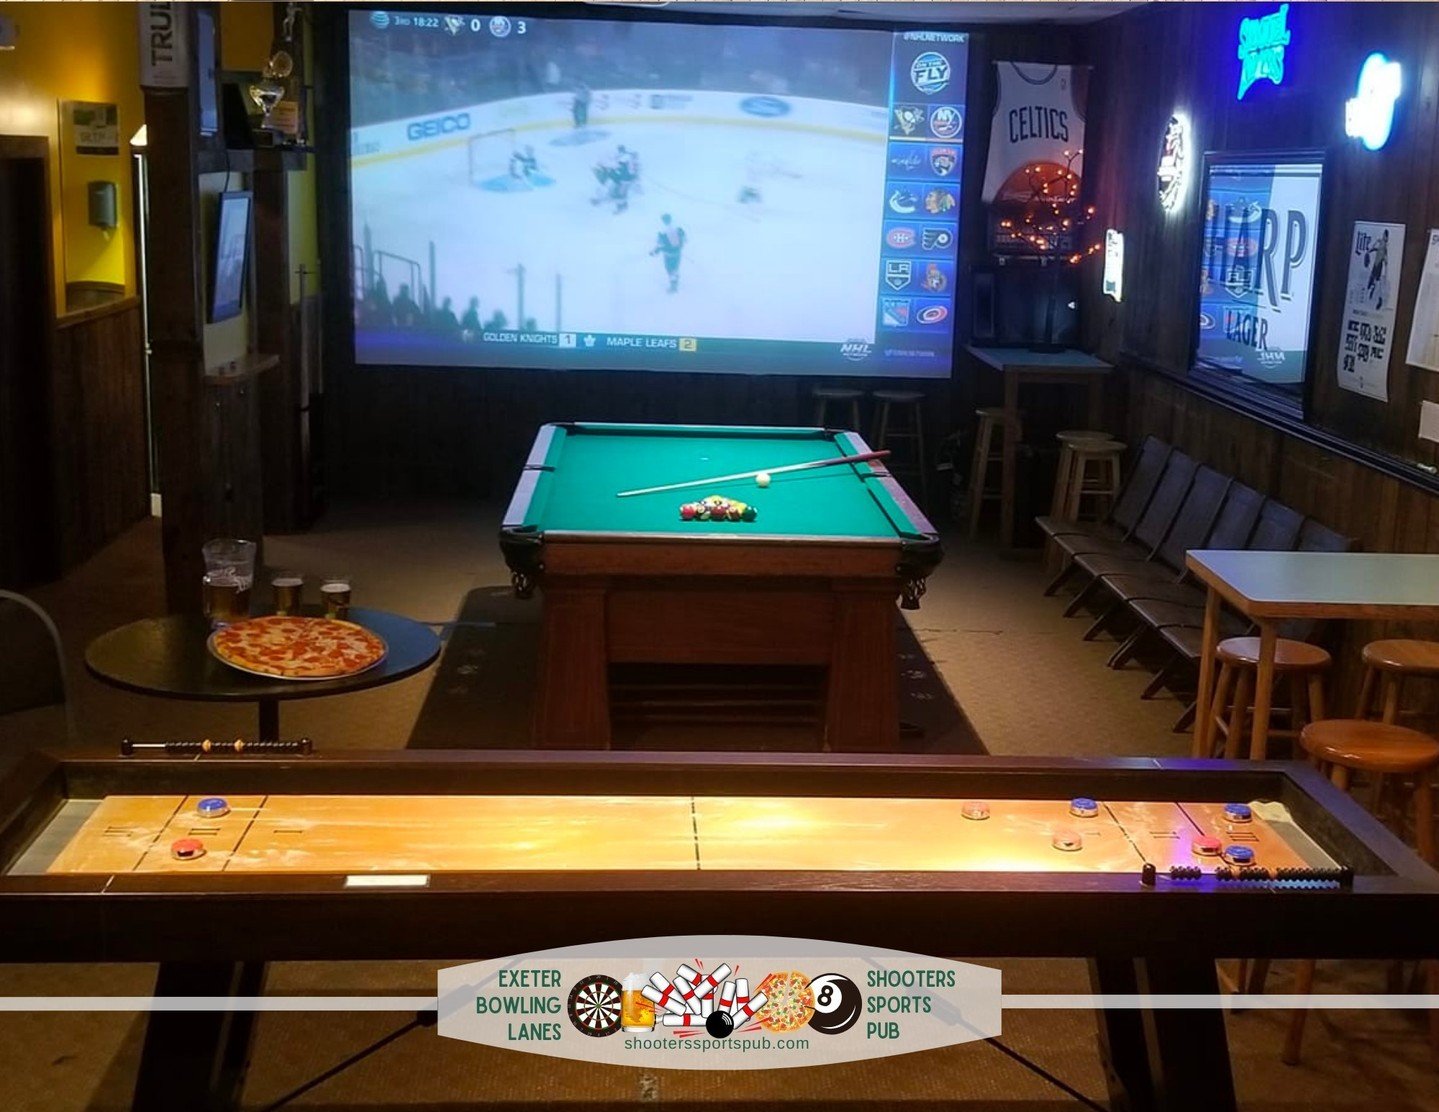 Love sports? We're your ultimate hangout spot! 🏀🏈⚾ Shooters Sports Pub is where every game gets better with friends, brews, and our big screens. Come get your game on! #SportsFanatic